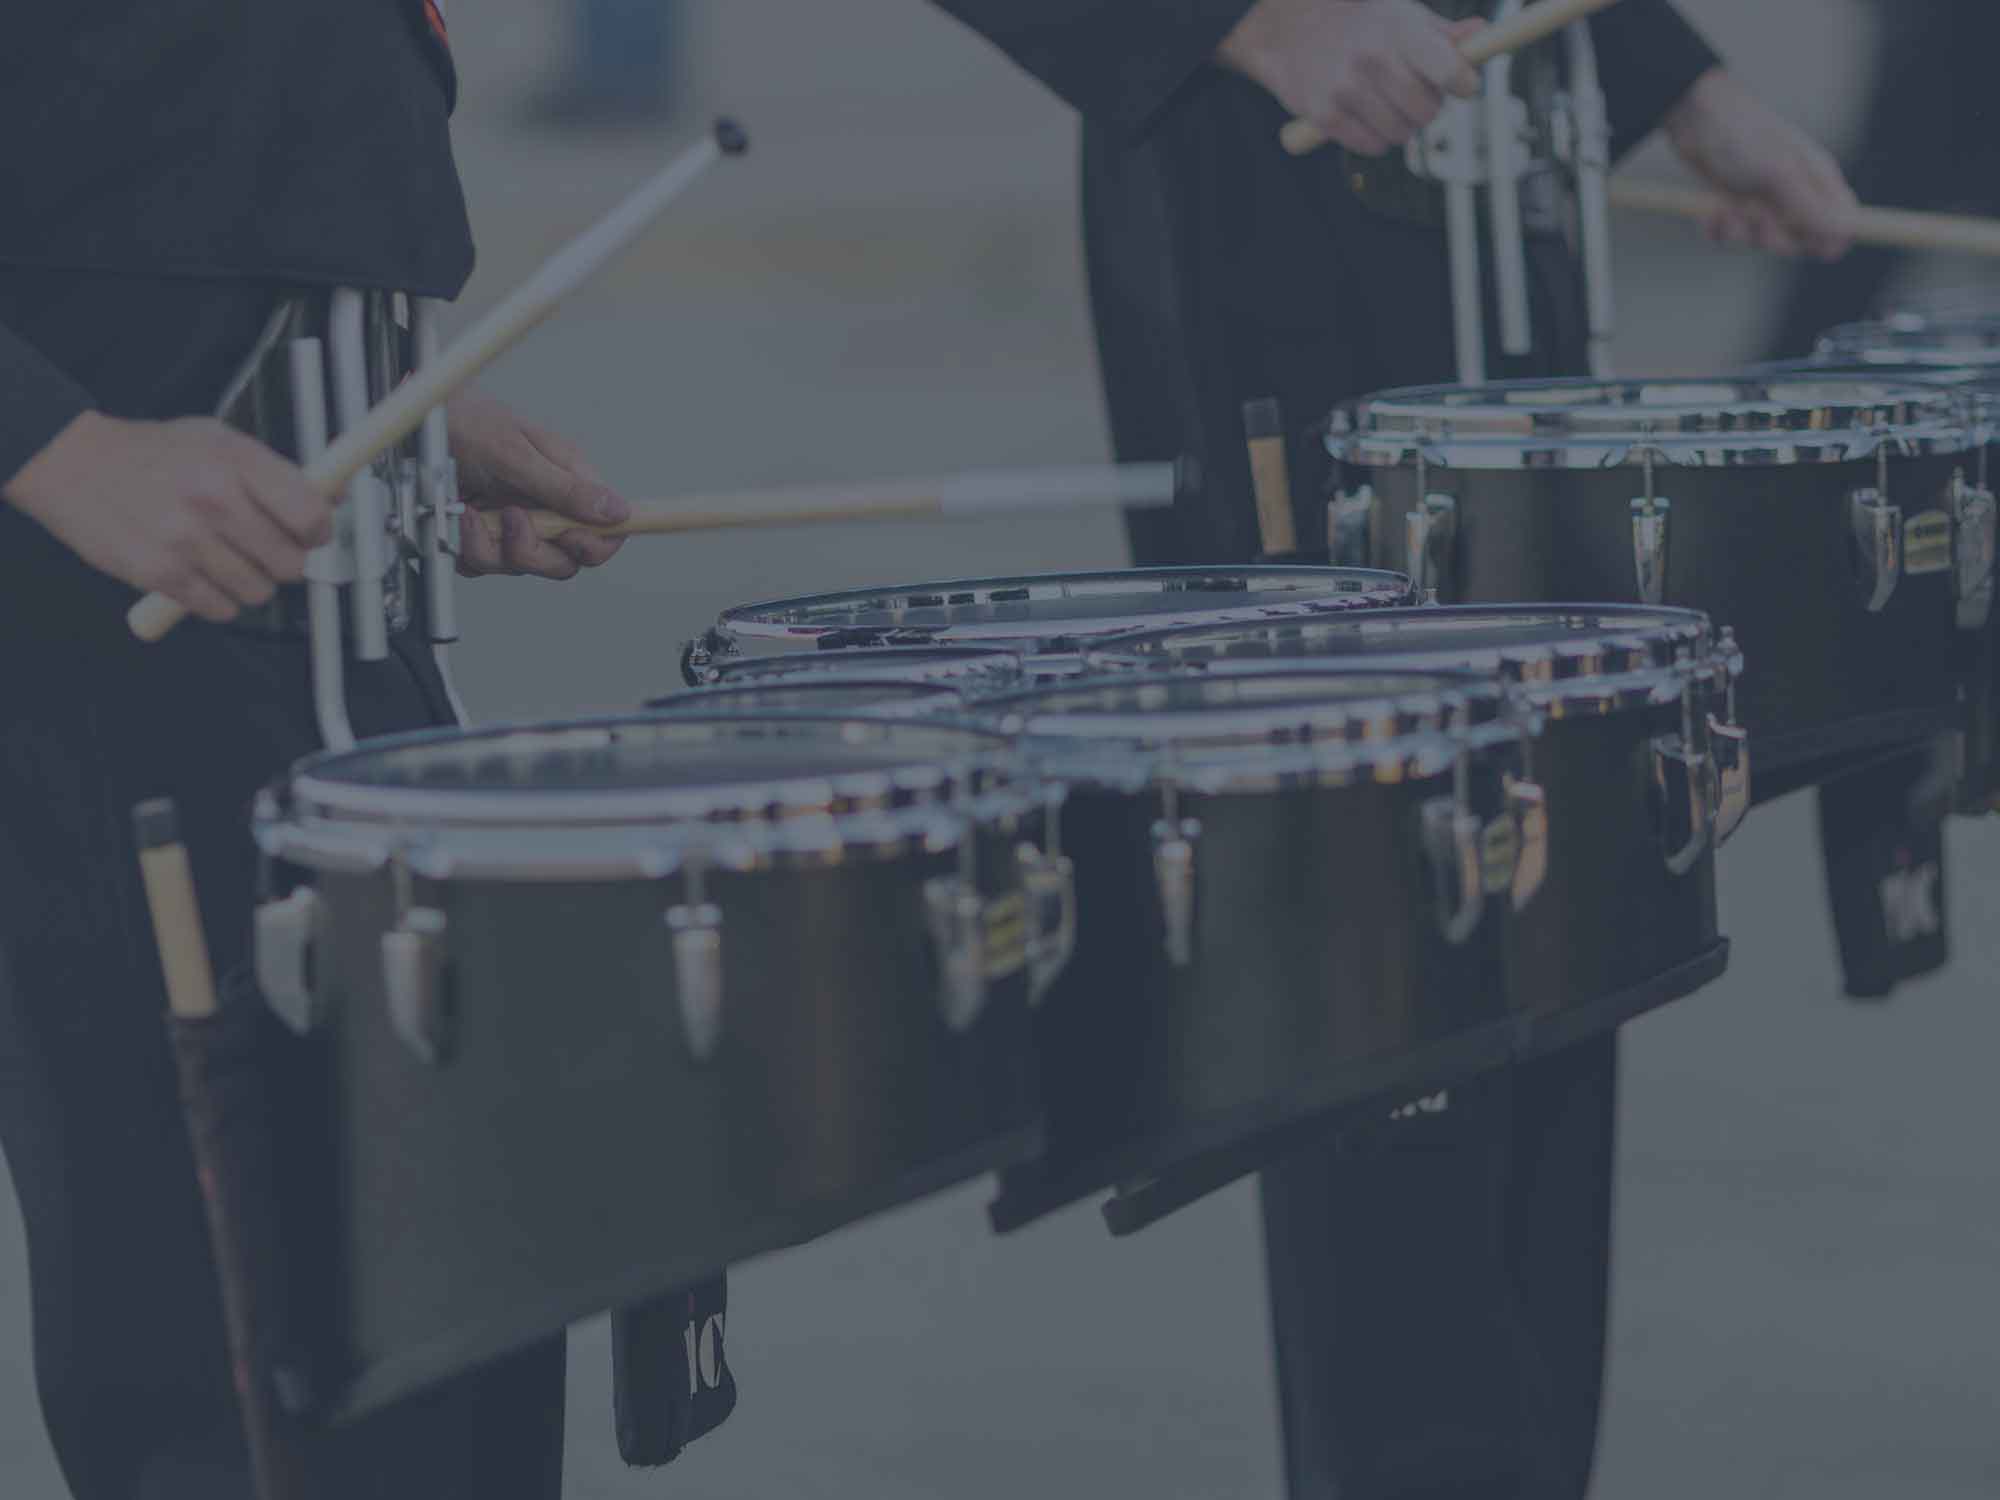 Marching Arts Programs Innovate. Shouldn’t Fundraising Evolve, Too?